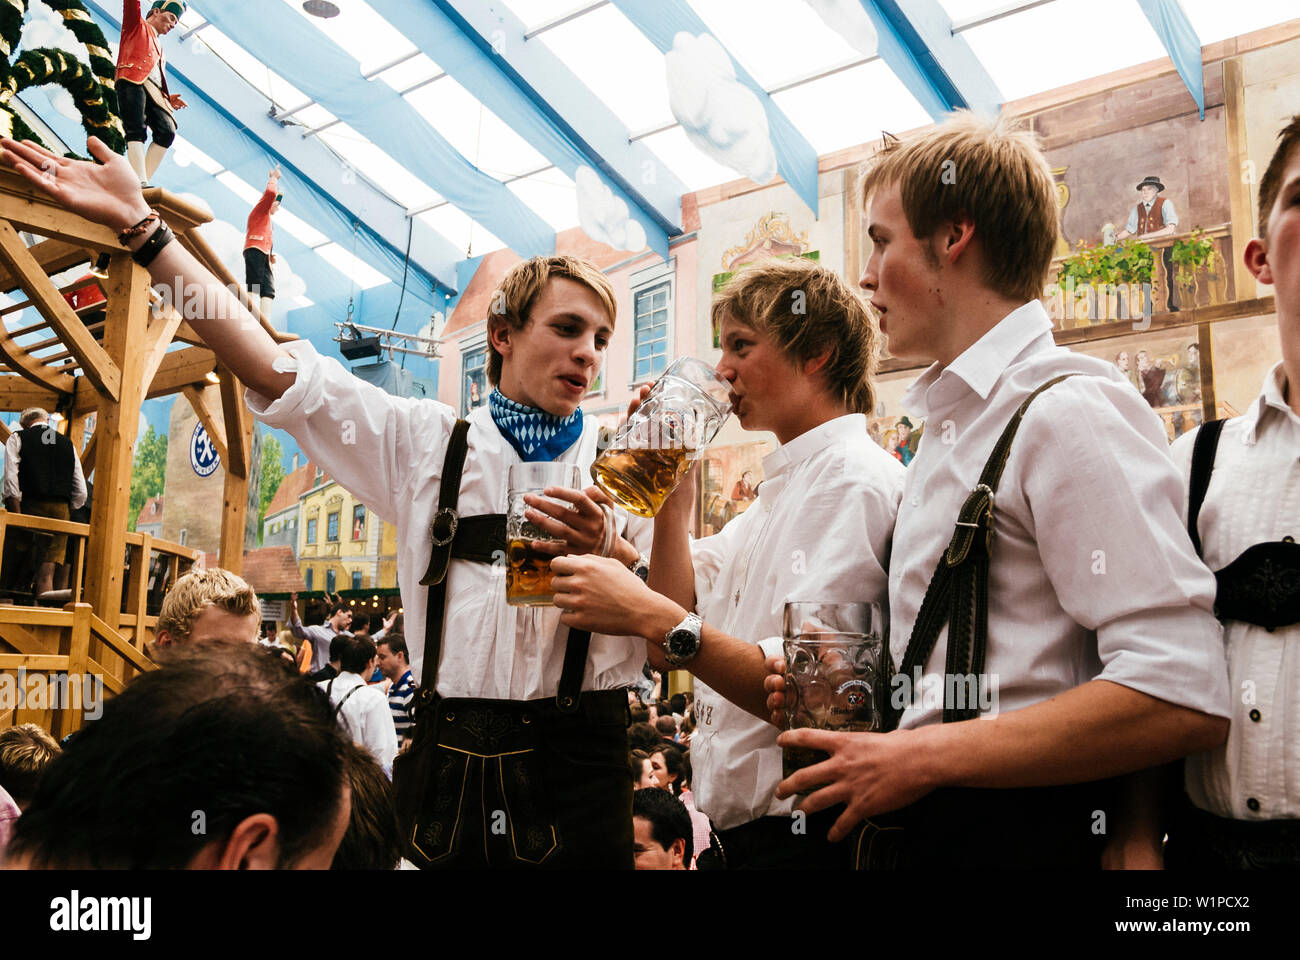 Young men in leather trousers standing on beer benches celebrate Oktoberfest in the beer tent Stock Photo